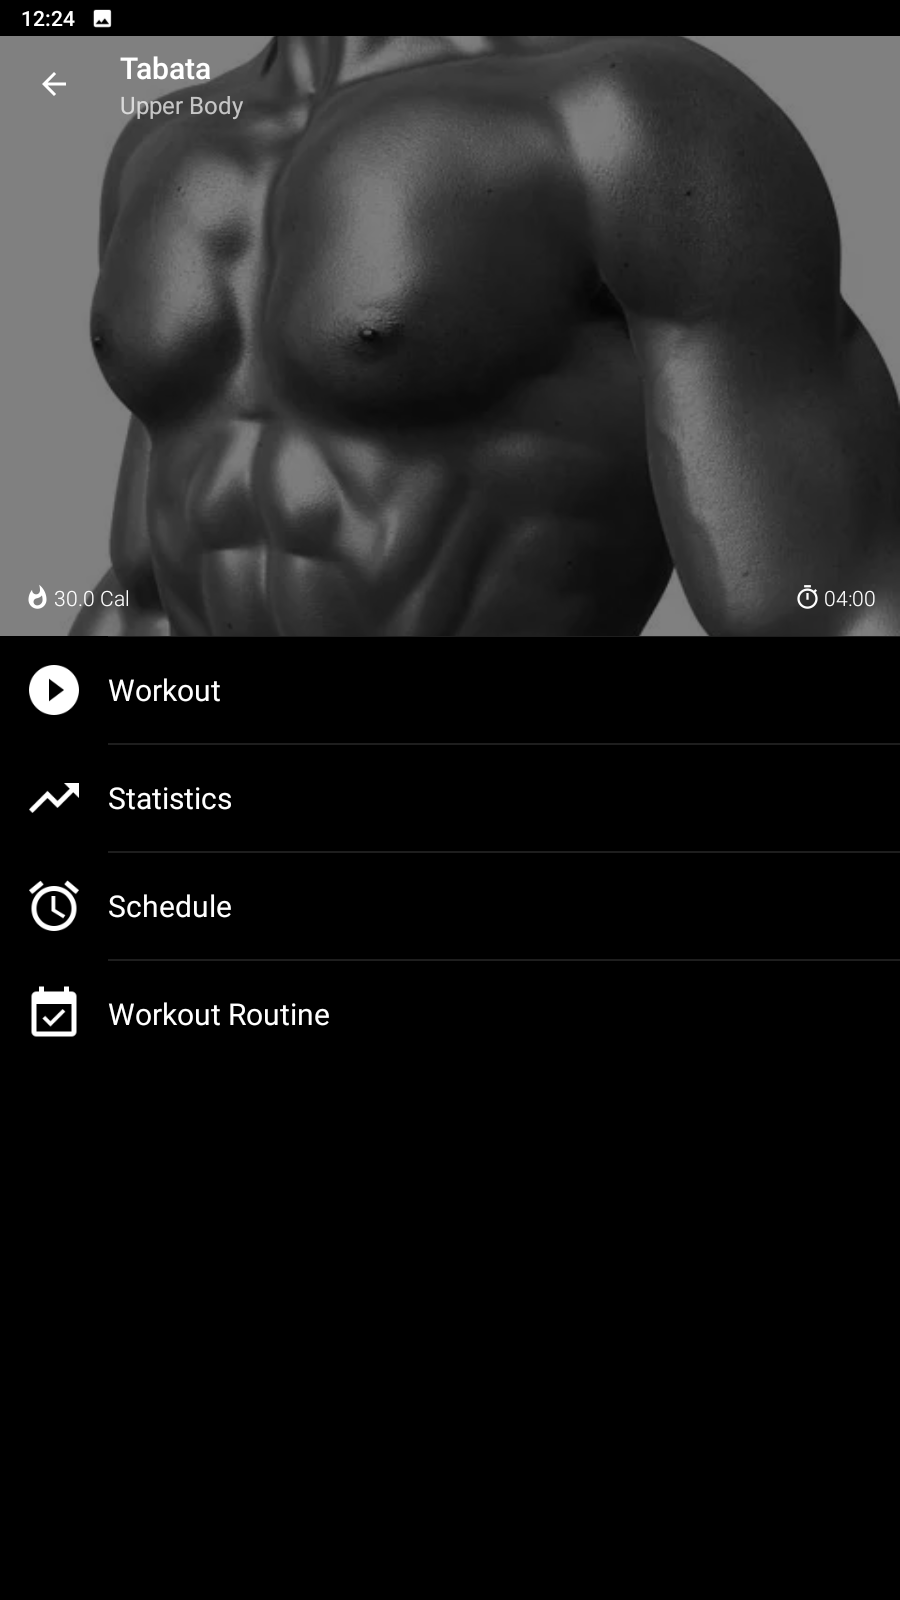 Upper body workout plan in the Tabata app